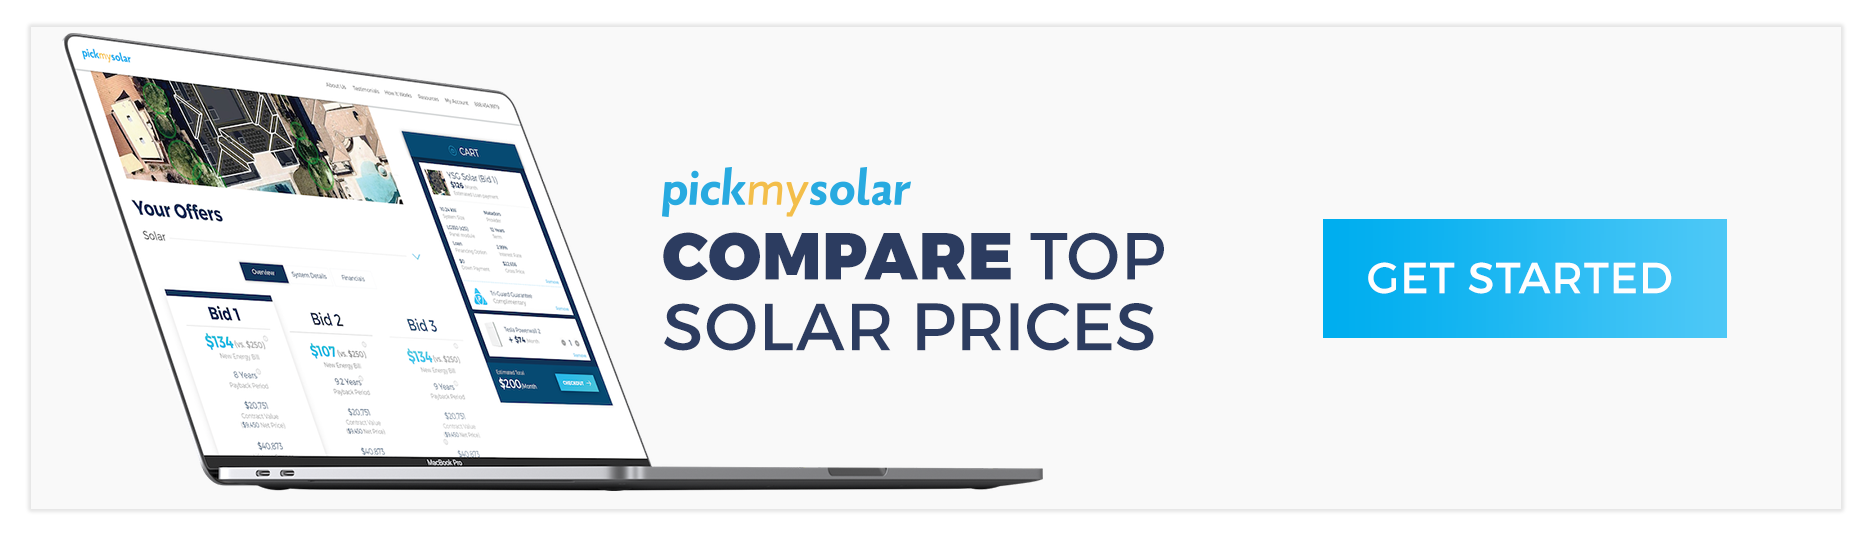 Compare Top Solar Prices with Pick My Solar